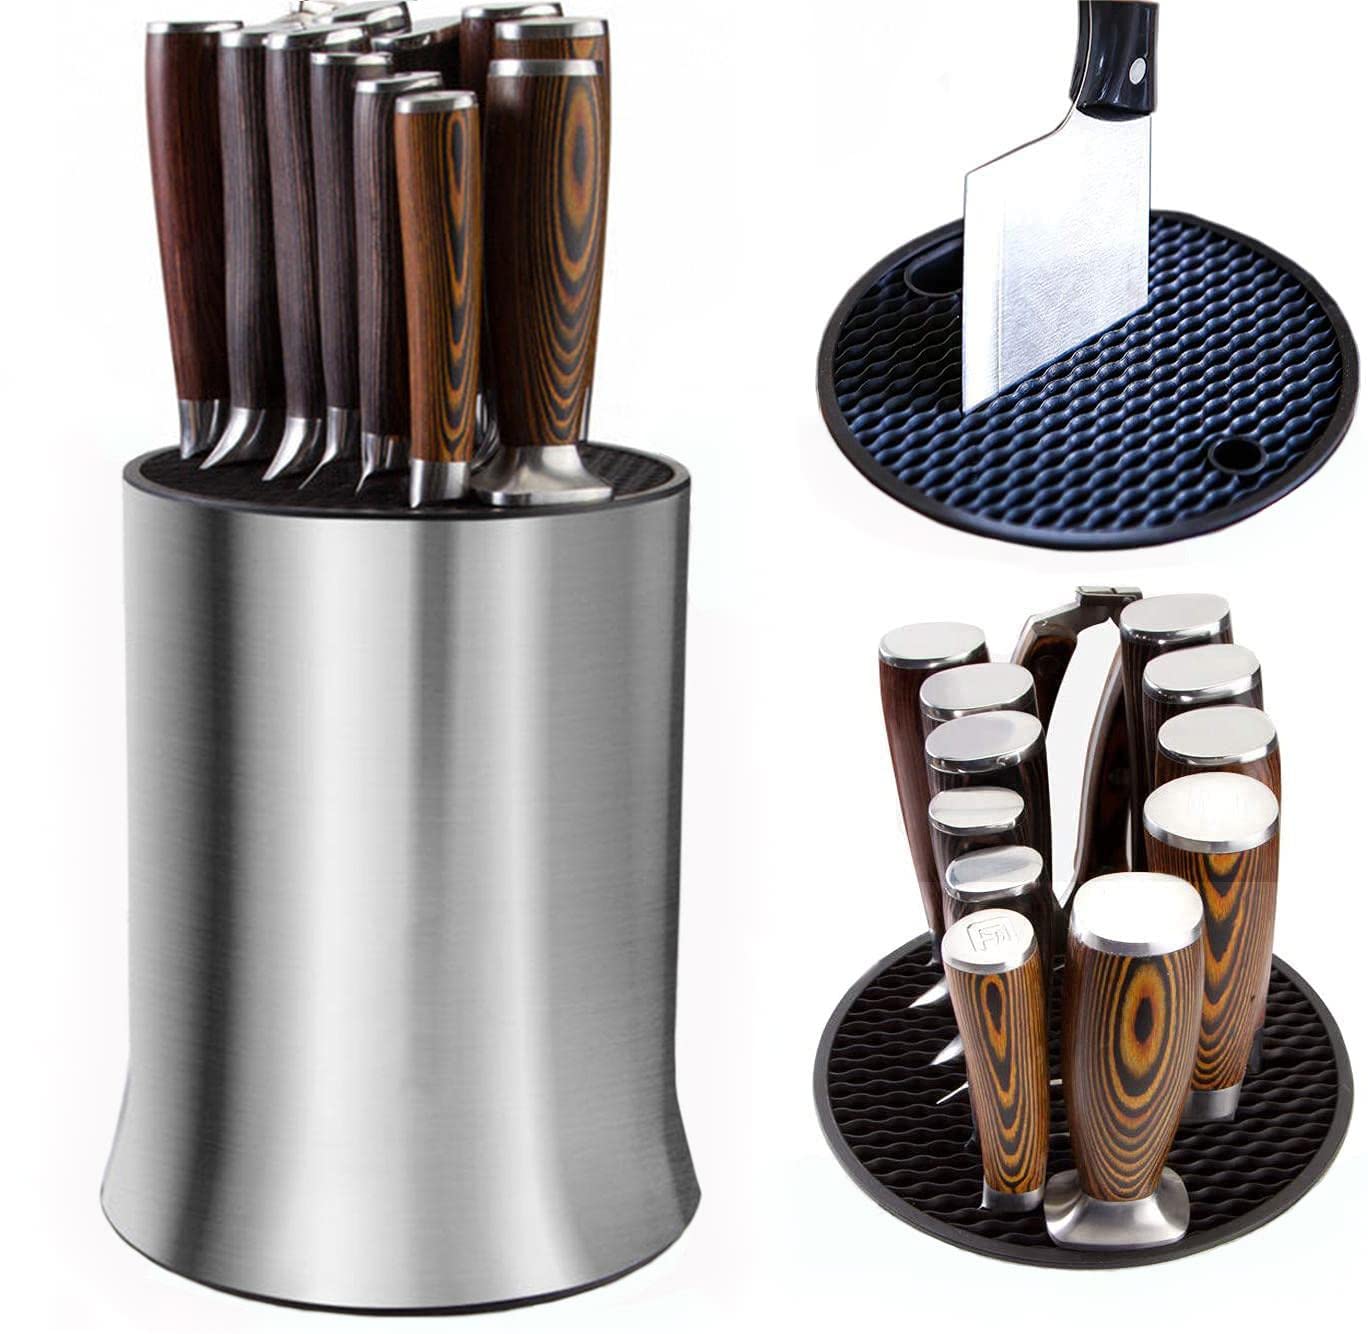 SYXUMLKLS XXL Universal Knife Block Holder, 304 Stainless Steel Without  Knives, Detachable for Easy Cleaning, Rust Proof